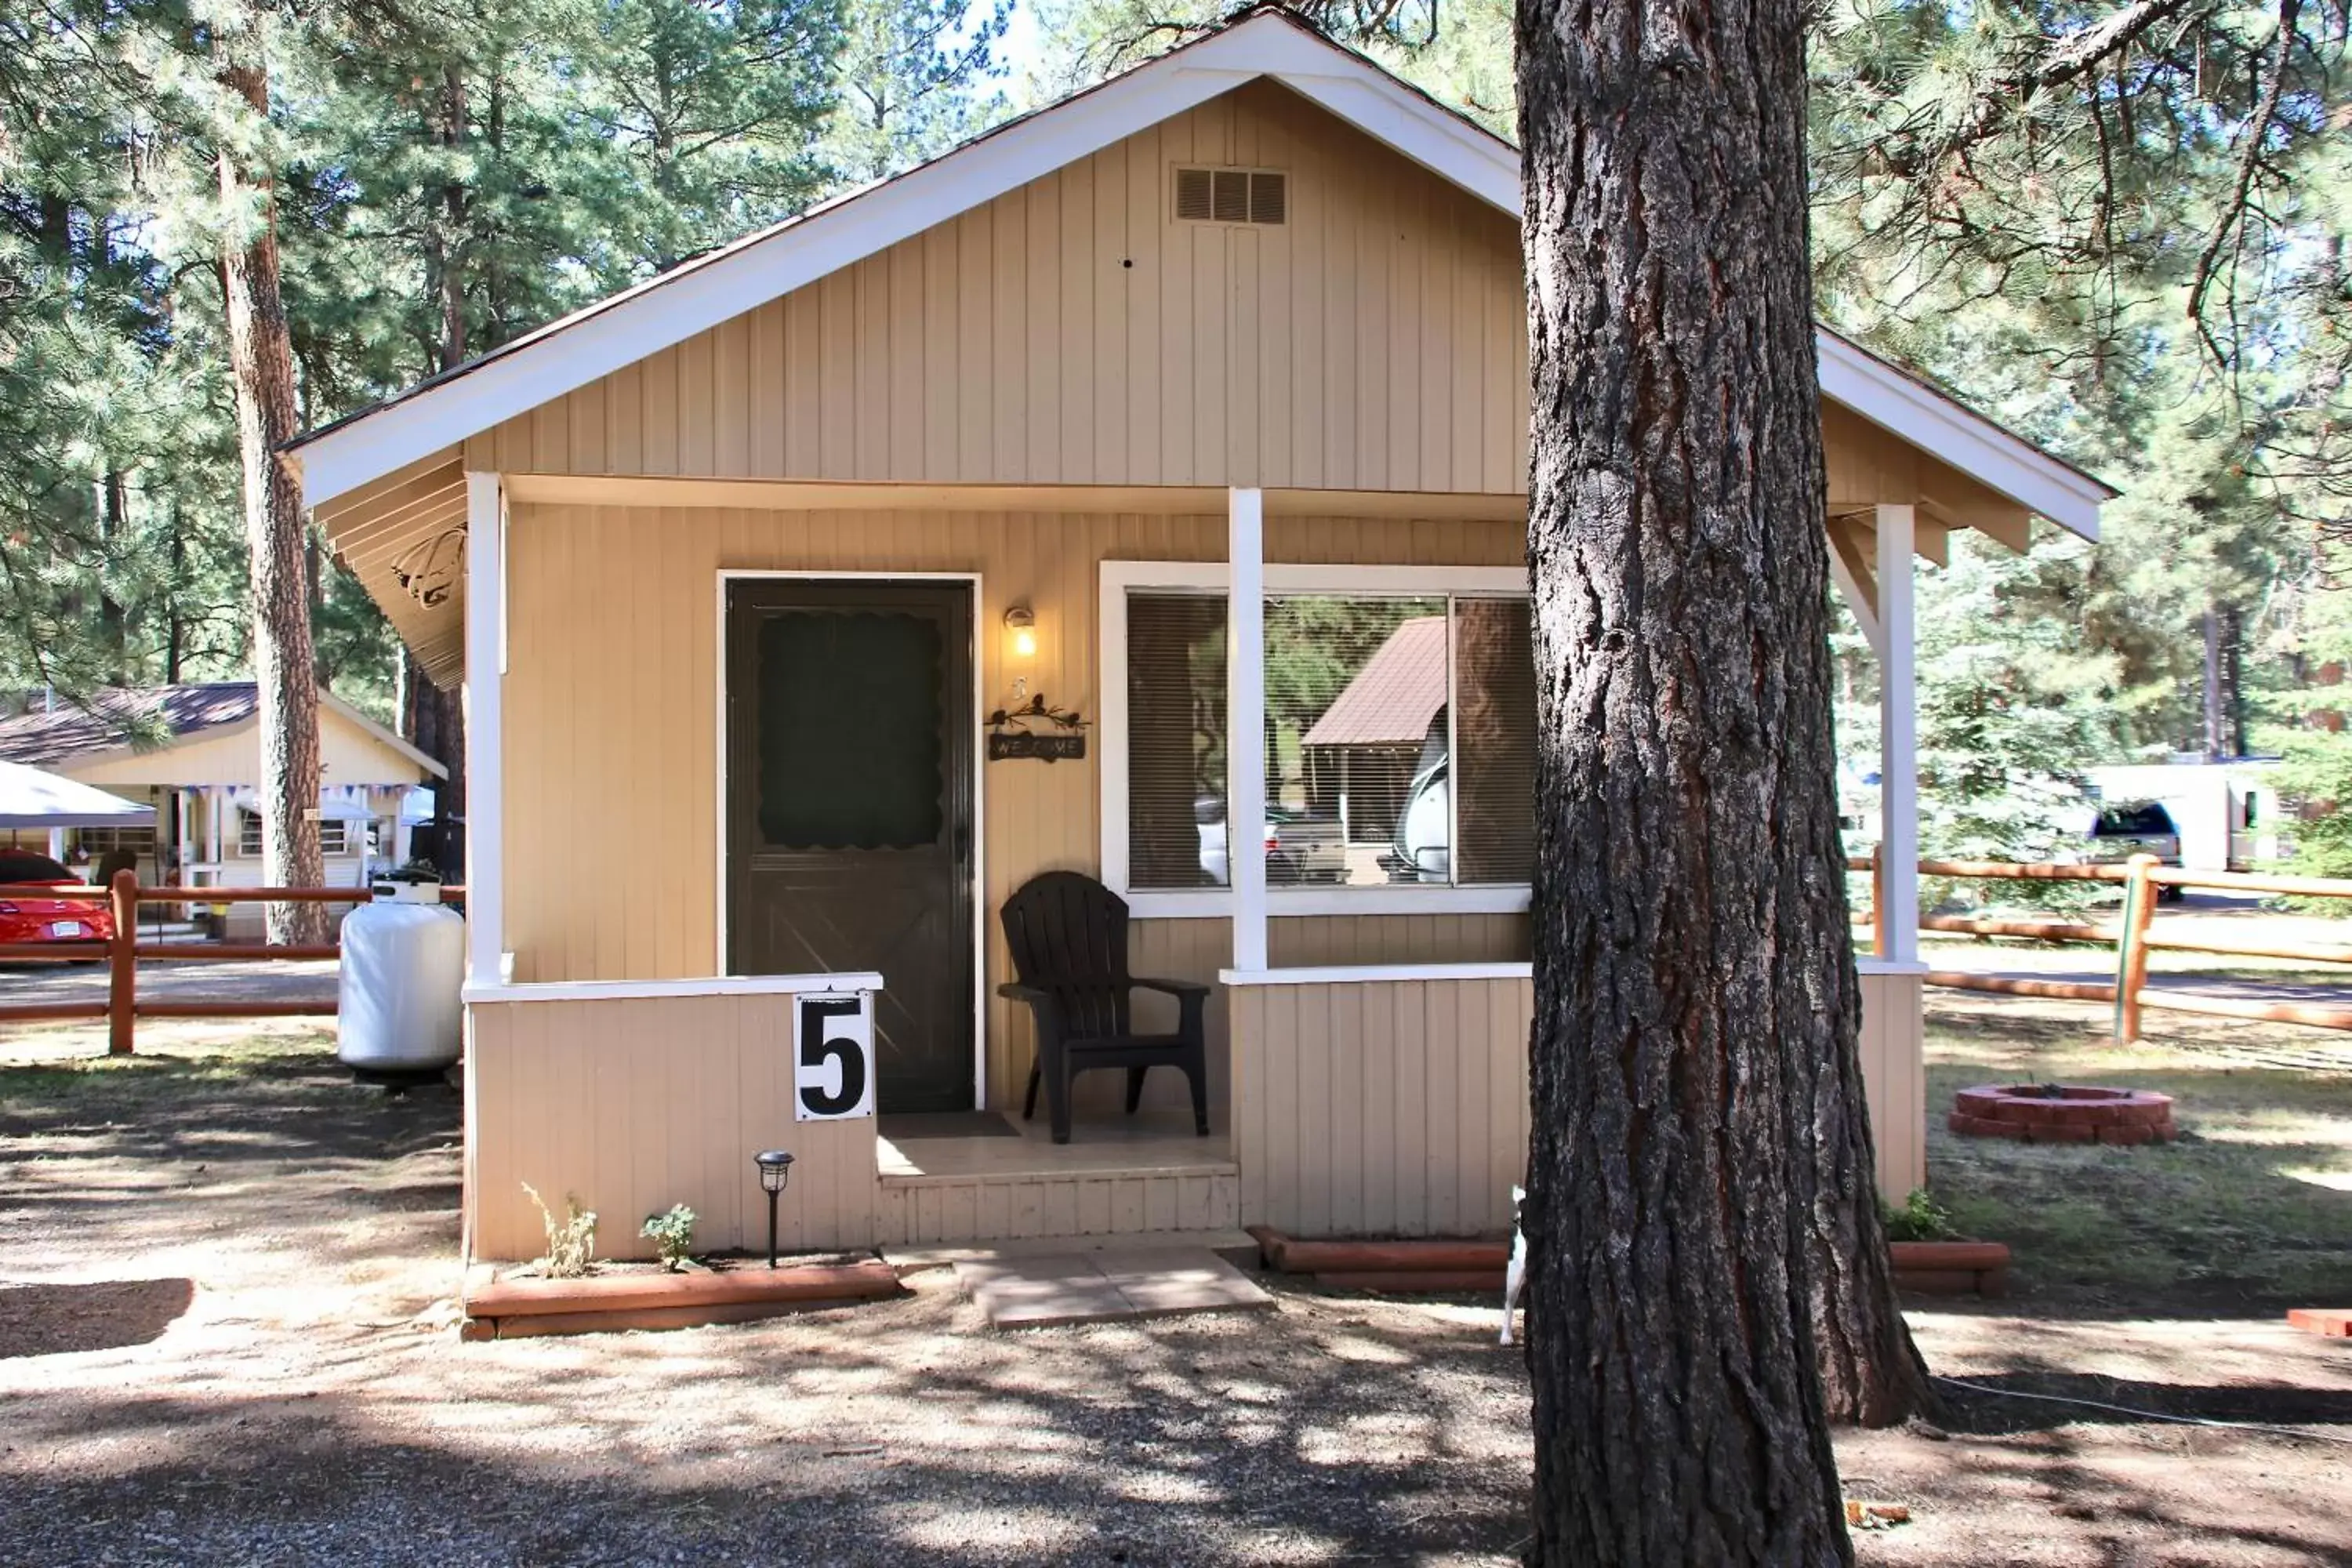 Property building in JW Vallecito